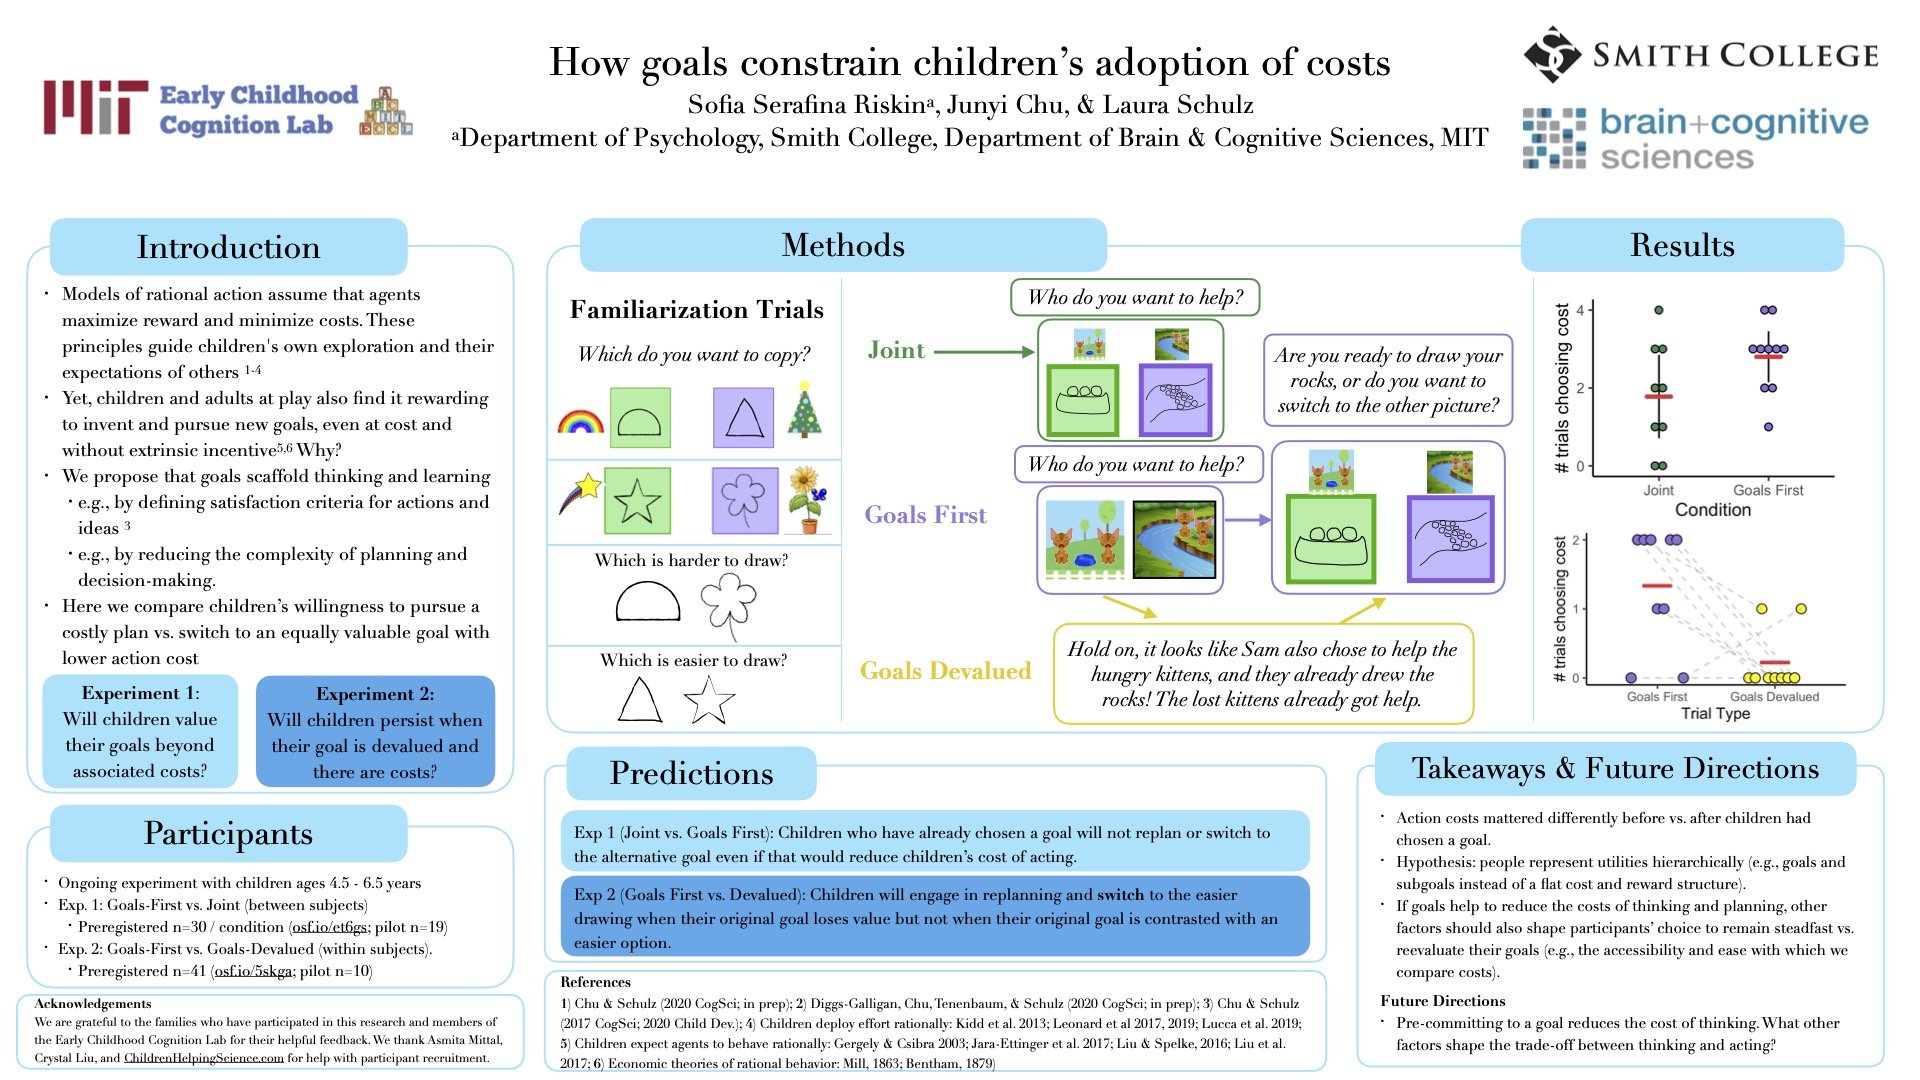   Riskin, S. S. , Chu, J., &amp; Schulz, L. E. (2021, November).  How goals constrain children’s adoption of costs.  Poster presented at the Harvard University Women in Psychology’s Annual Trends in Psychology Summit (Virtual). 